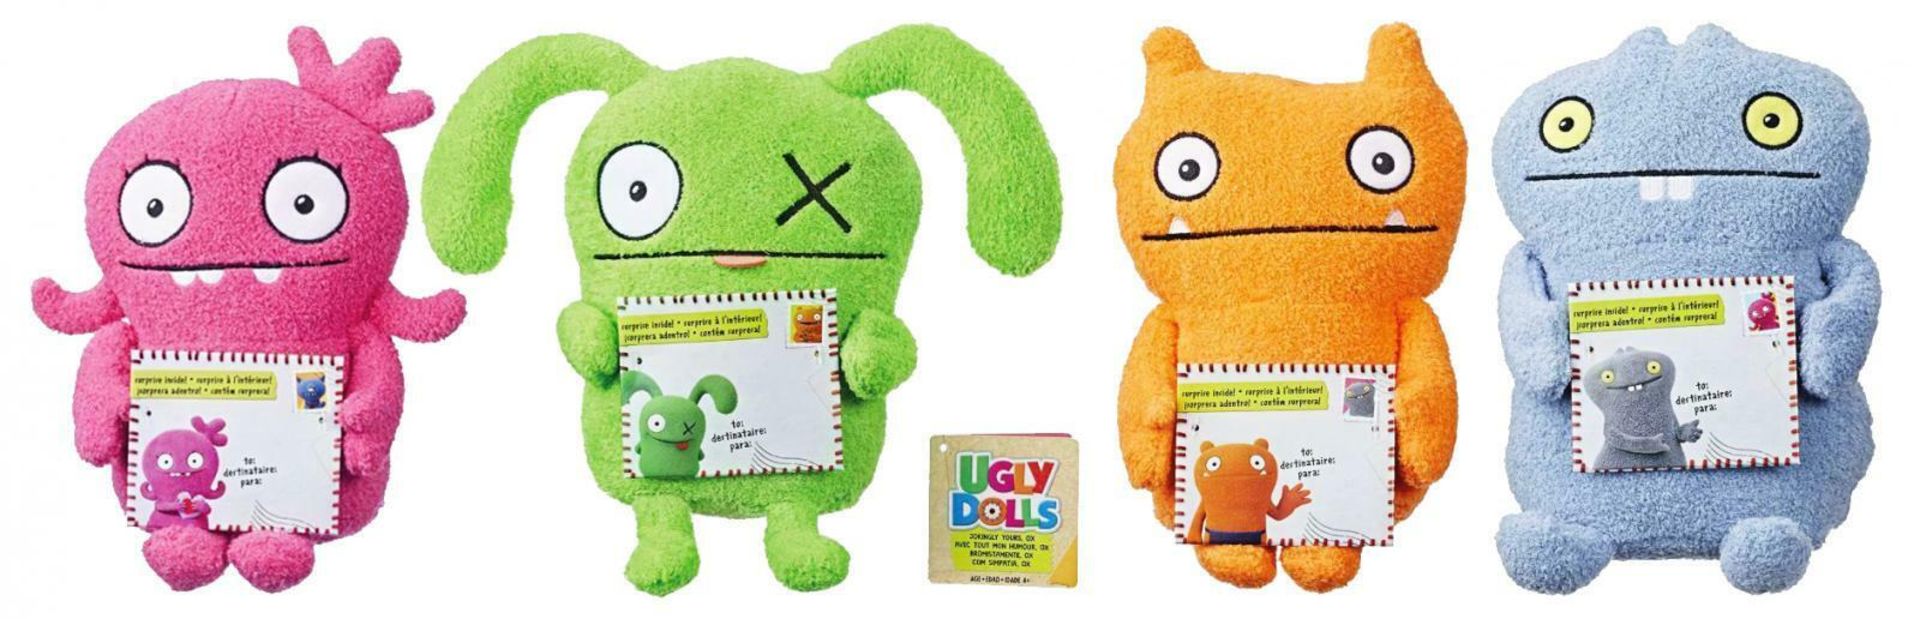 15 x Hasbro Sincerely Ugly Dolls | Plush Character | Total RRP £135